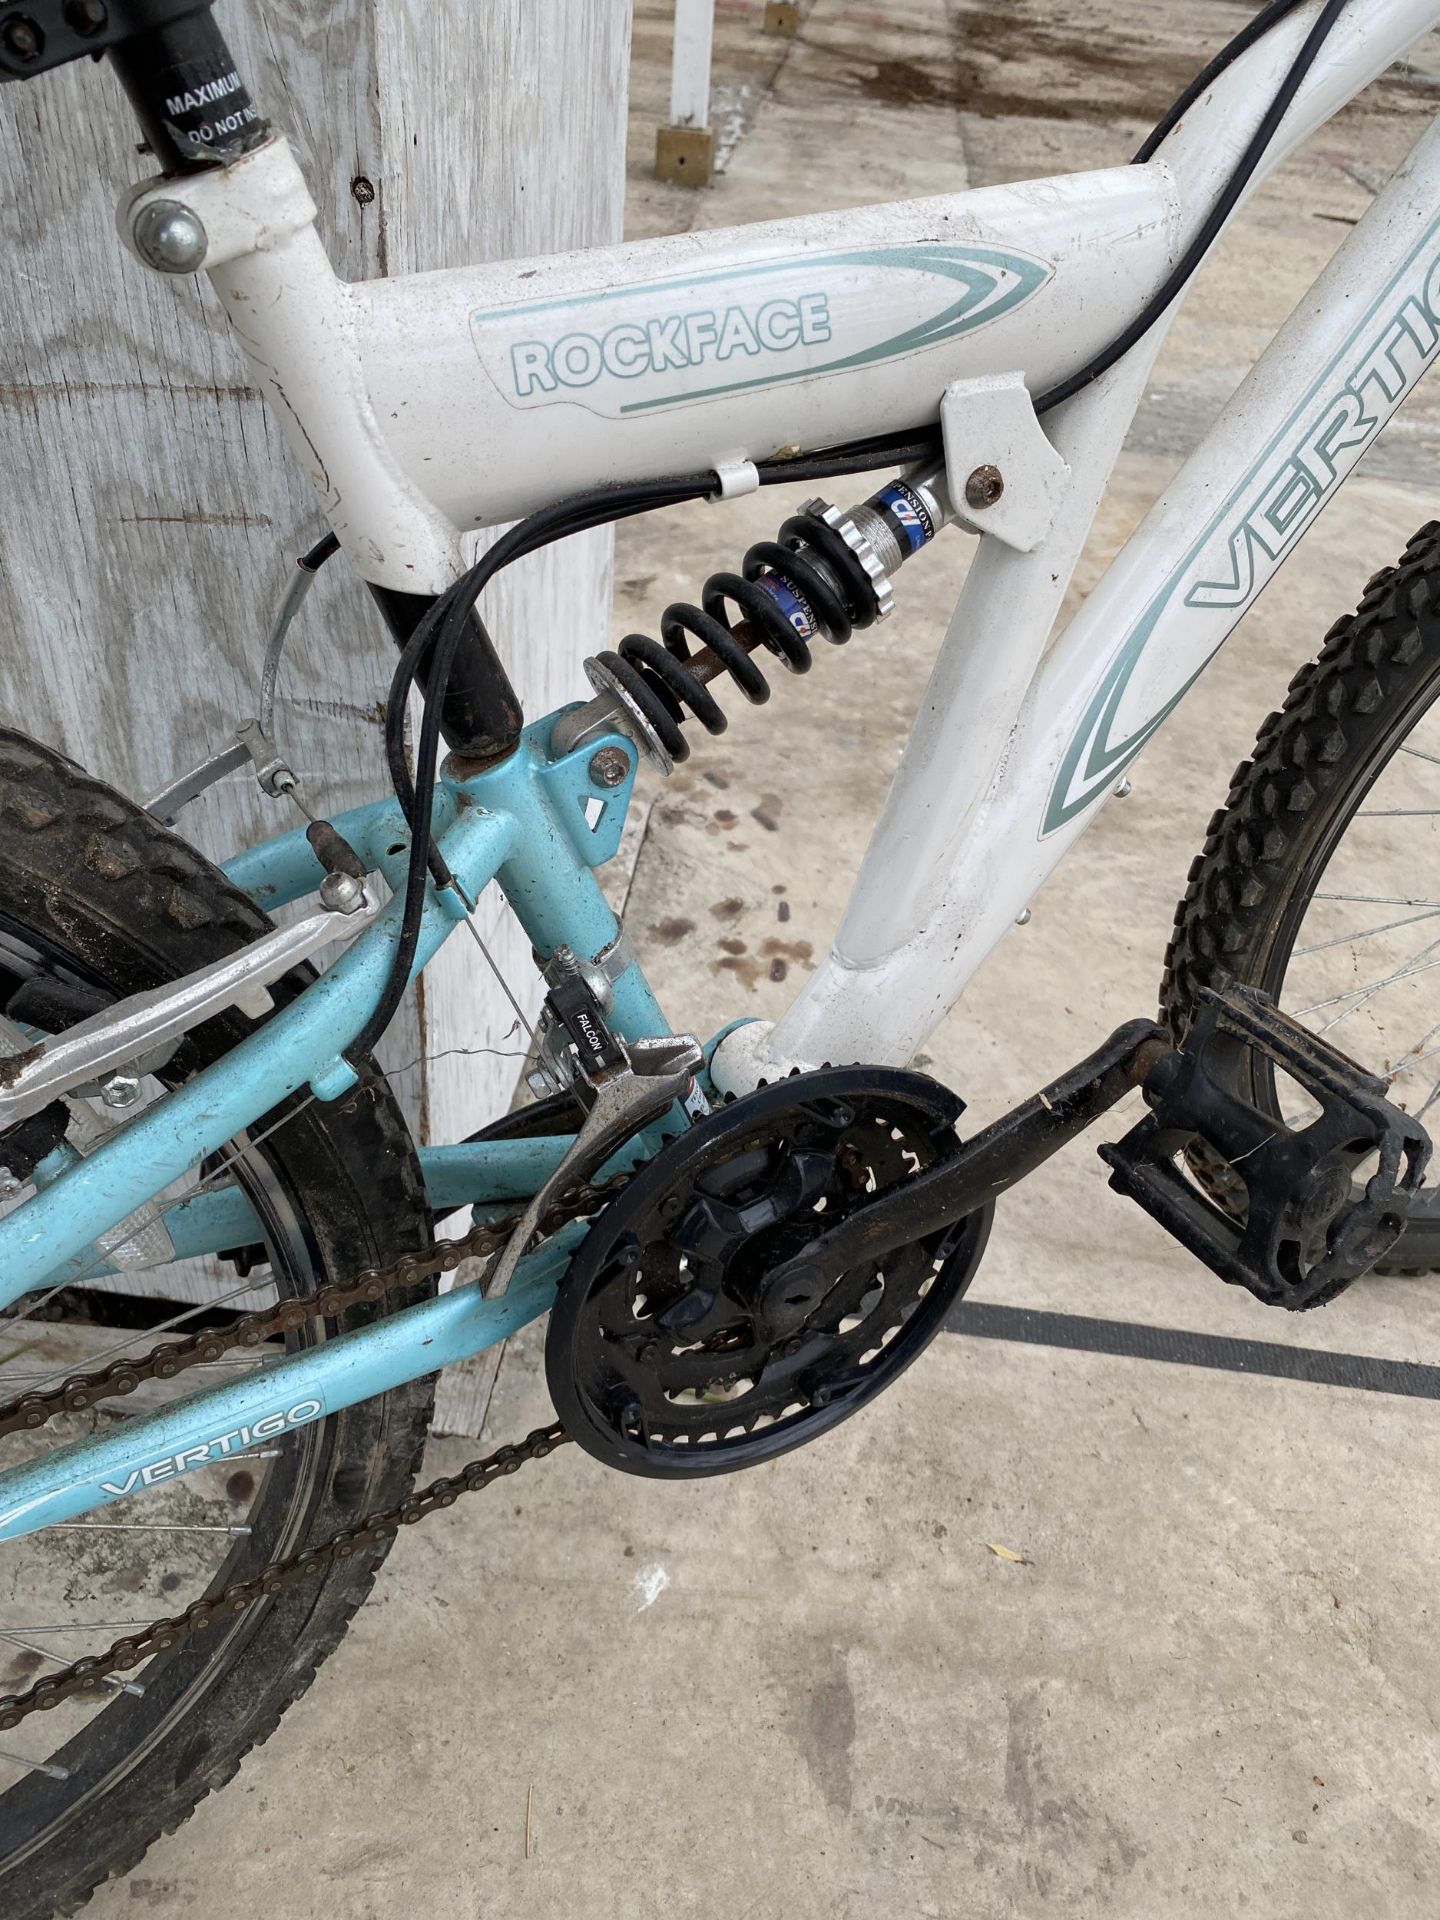 A VERTIGO ROCKFACE MOUNTAIN BIKE WITH FRONT AND REAR SUSPENSION AND 18 SPEED SHIMANO GEAR SYSTEM - Image 3 of 4